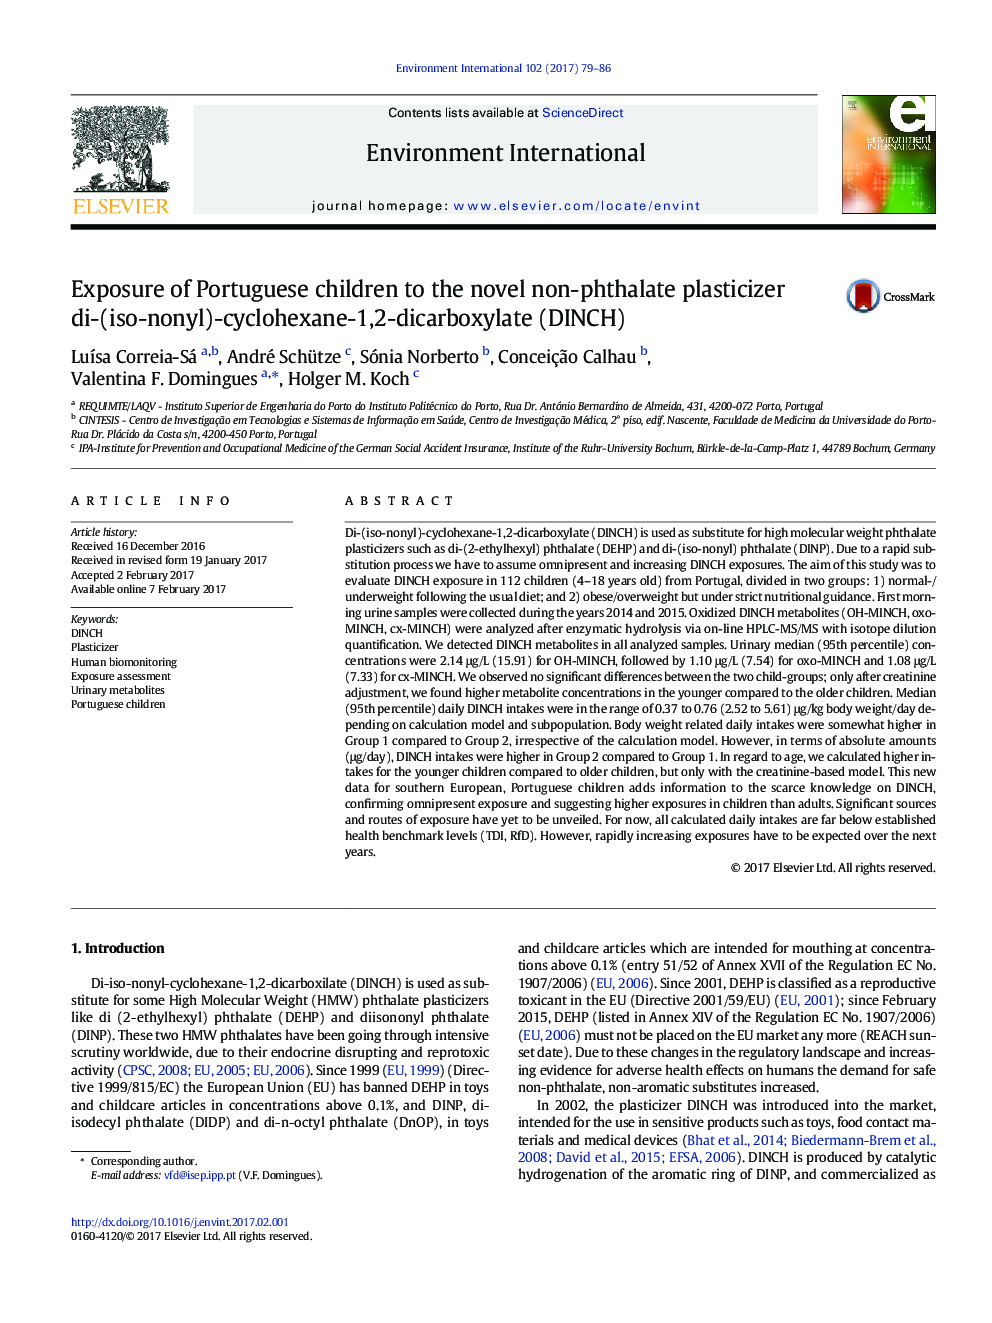 Exposure of Portuguese children to the novel non-phthalate plasticizer di-(iso-nonyl)-cyclohexane-1,2-dicarboxylate (DINCH)